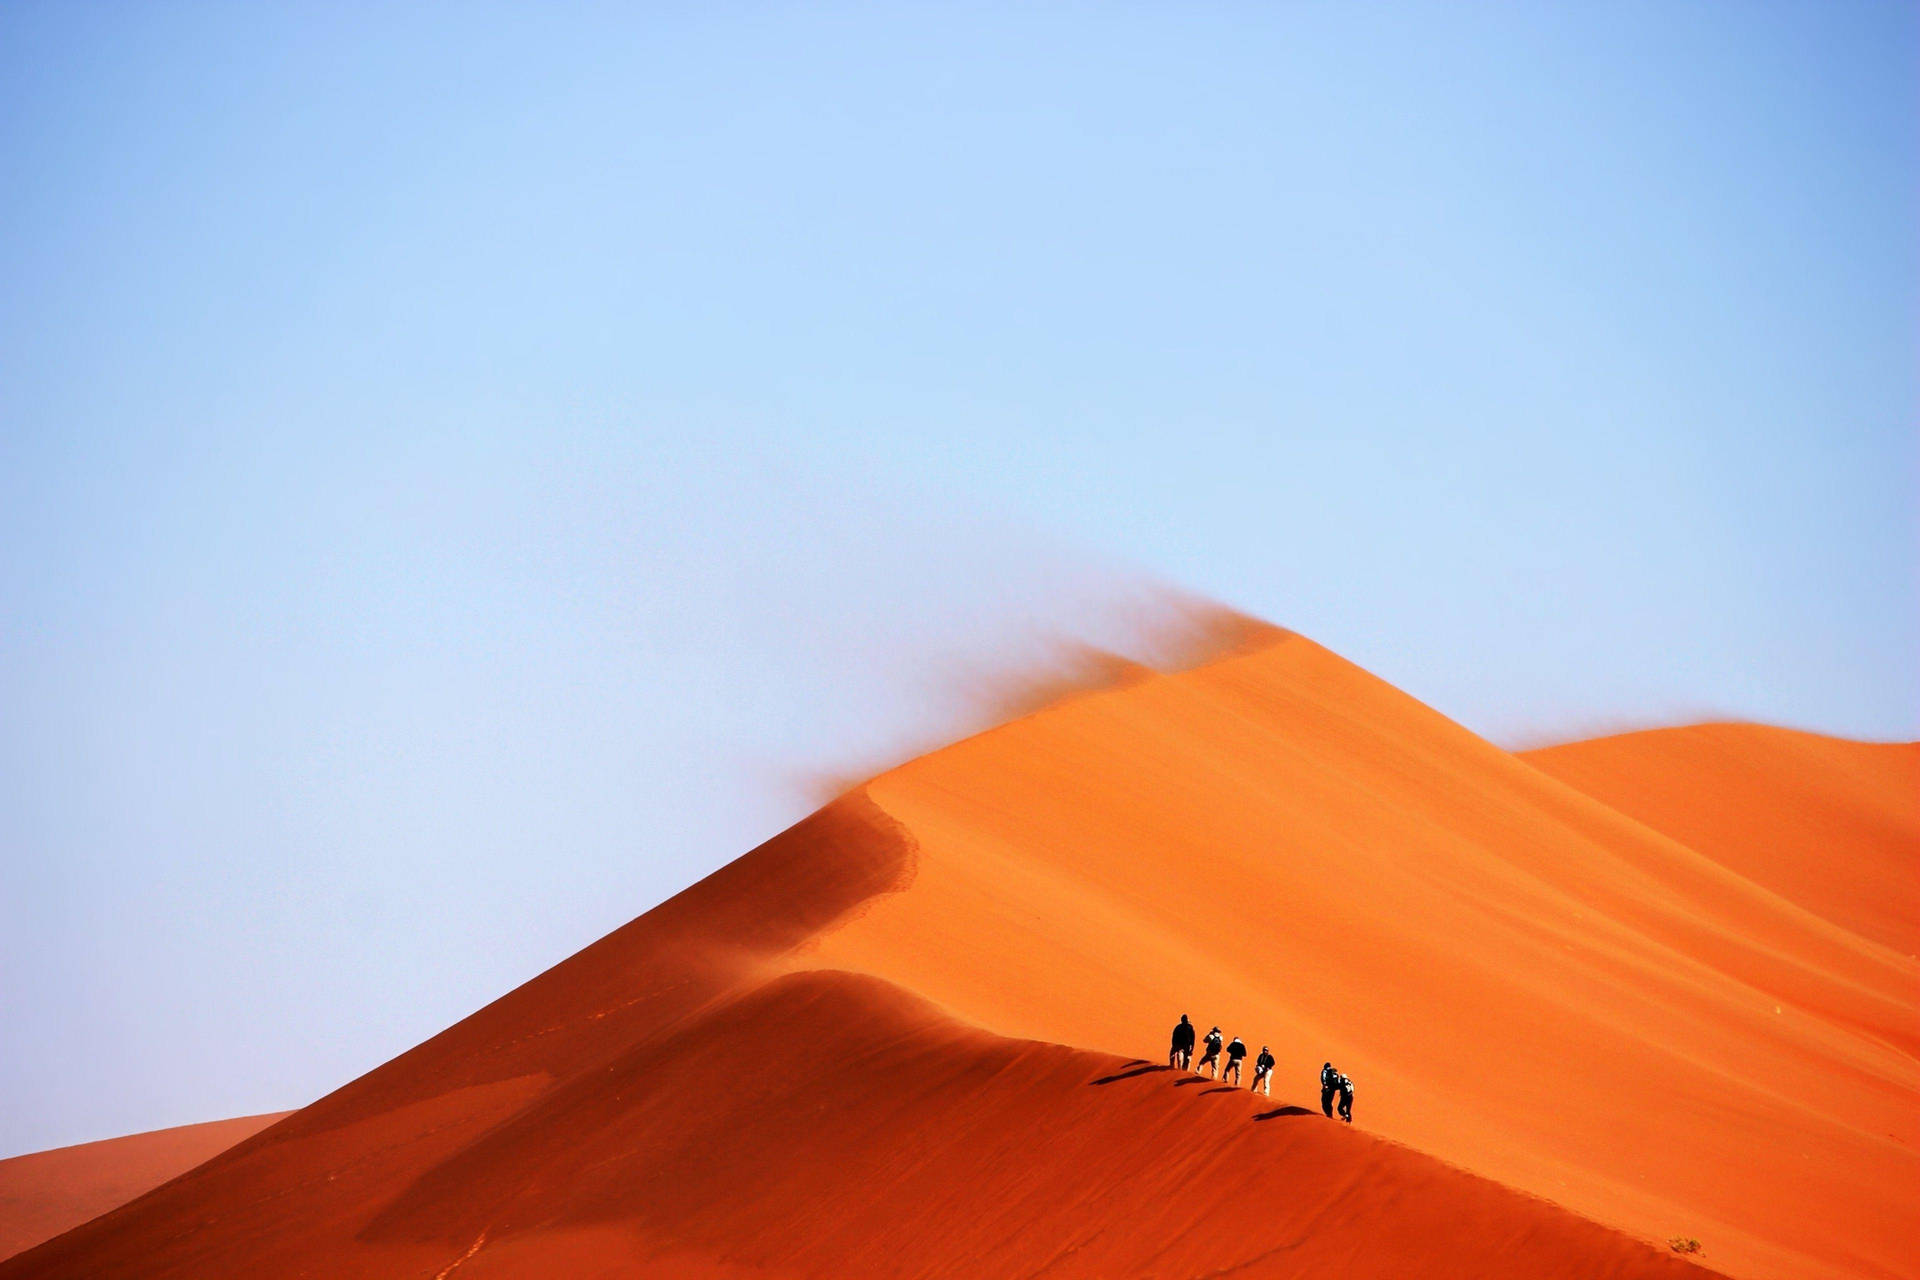 1) A Group Of People Seeking Adventure, Braving The Elements In A Windy Desert! Background